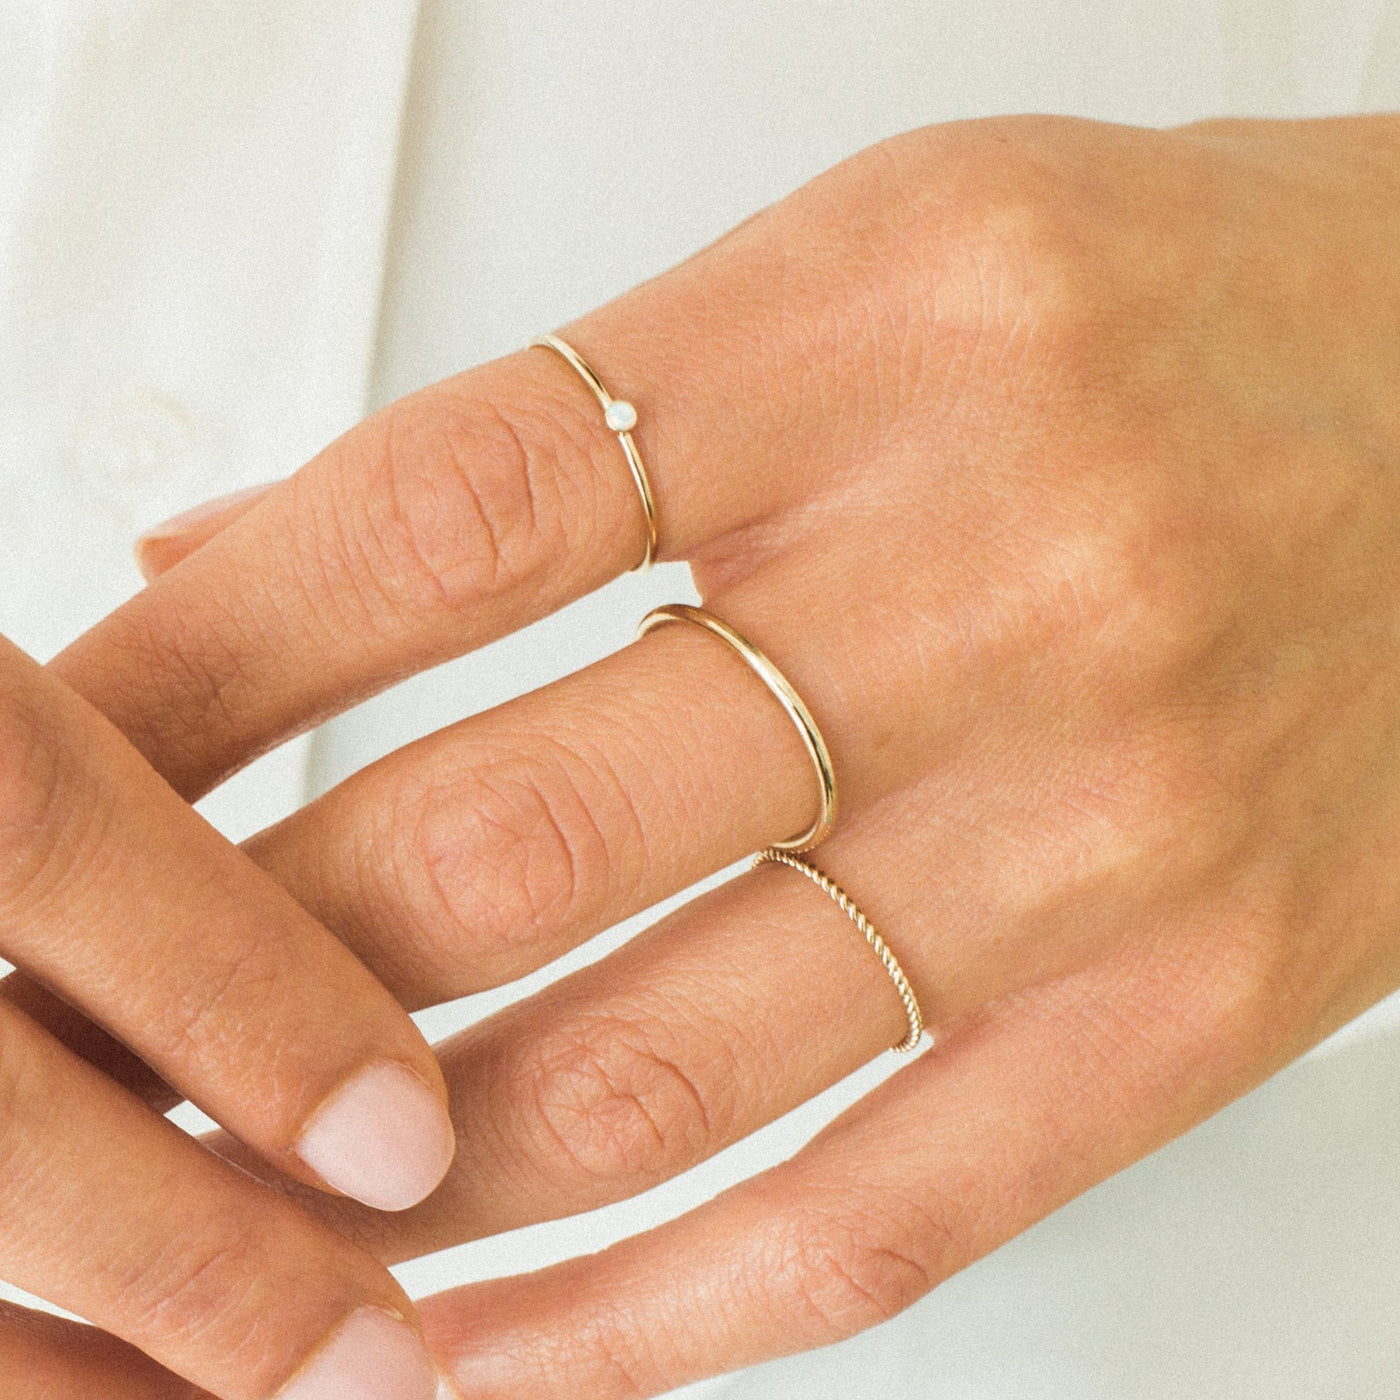 Braided Stacking Ring | Simple & Dainty Jewelry